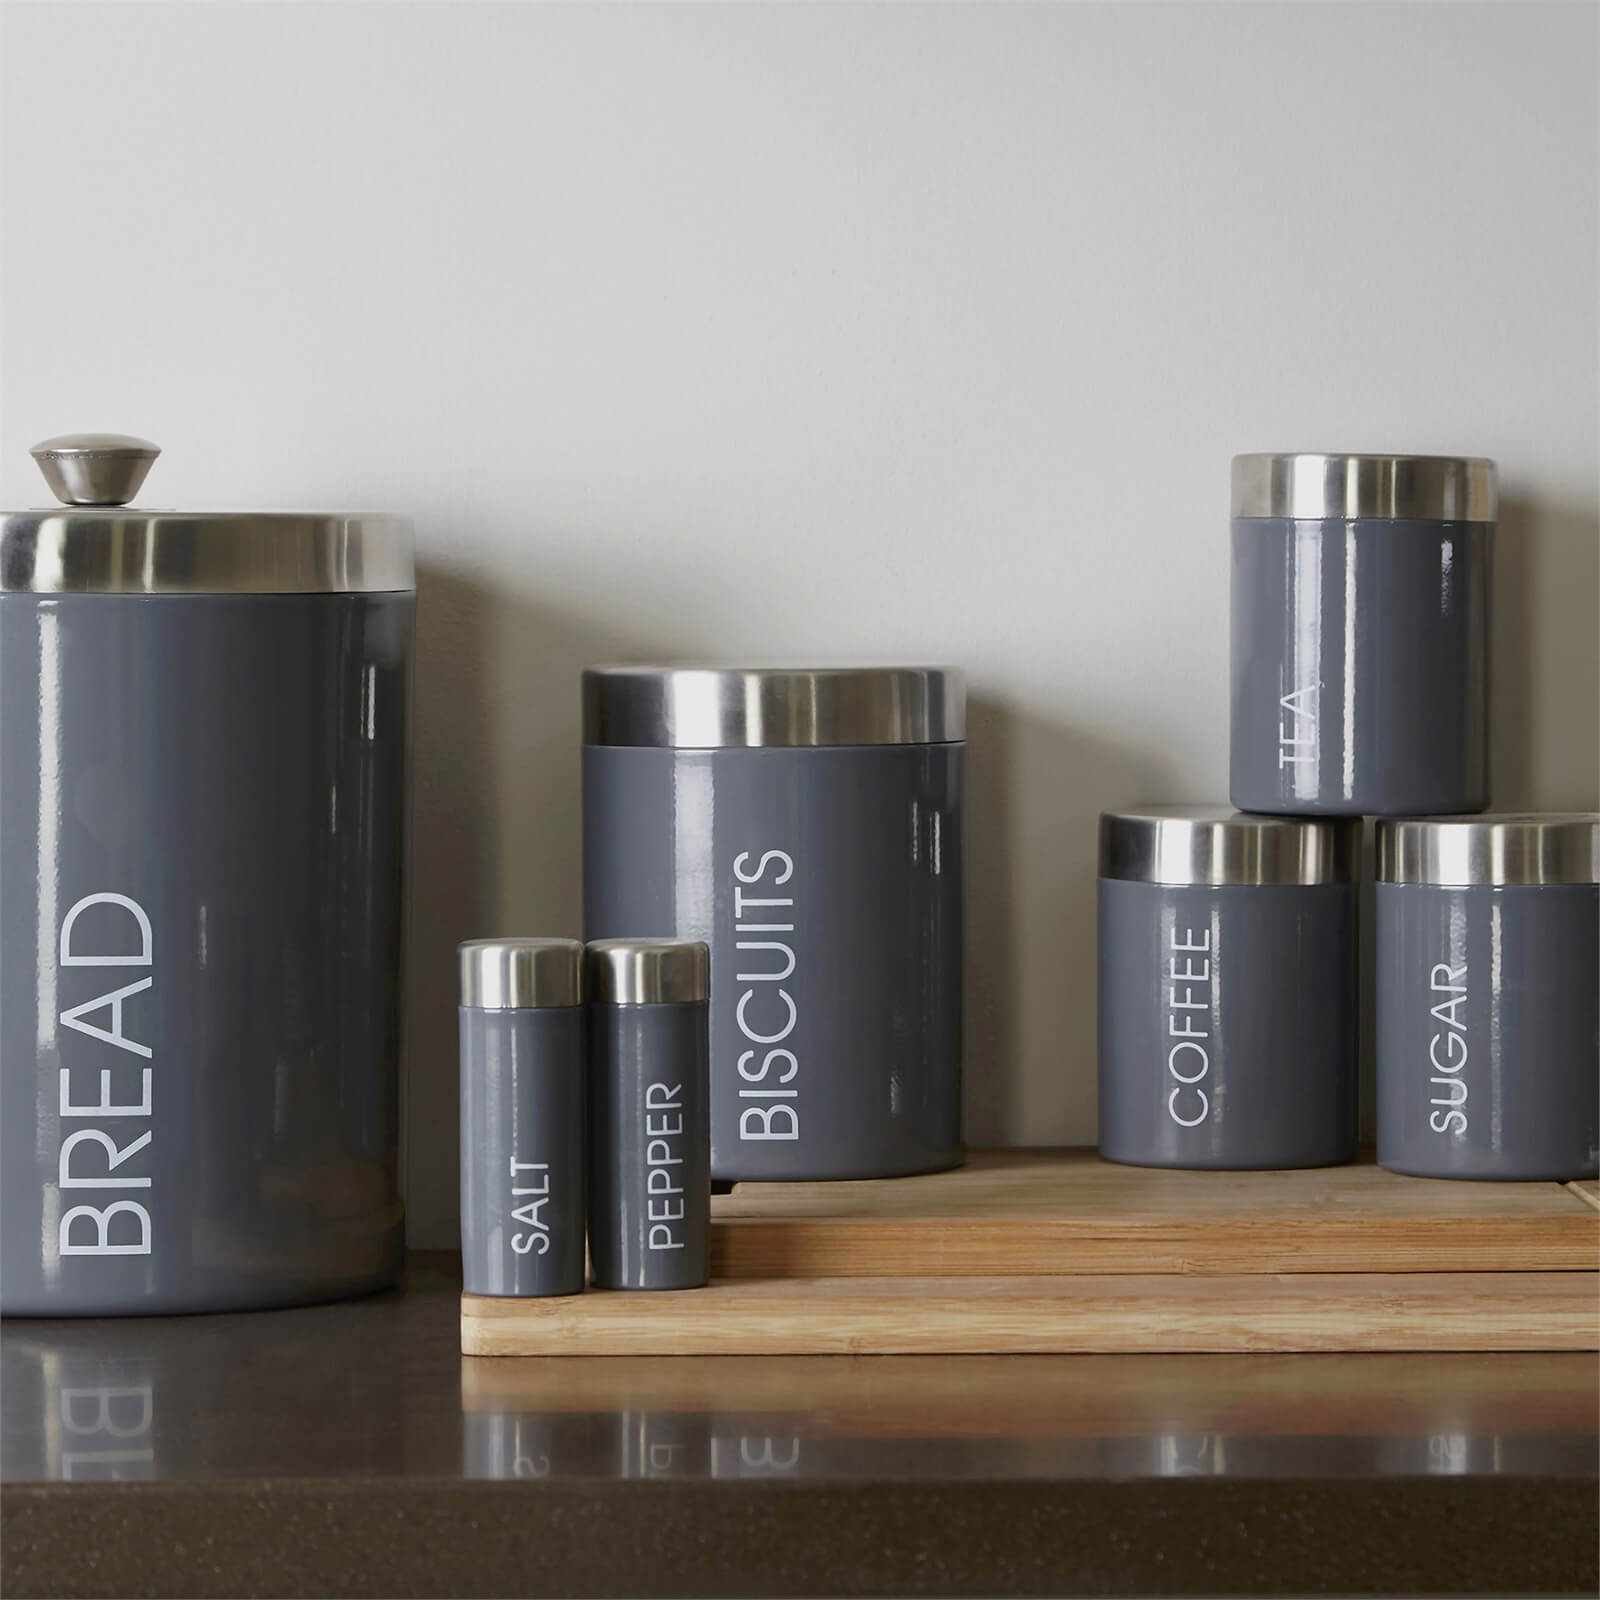 Grey Enamel Liberty Canisters - Set of 3